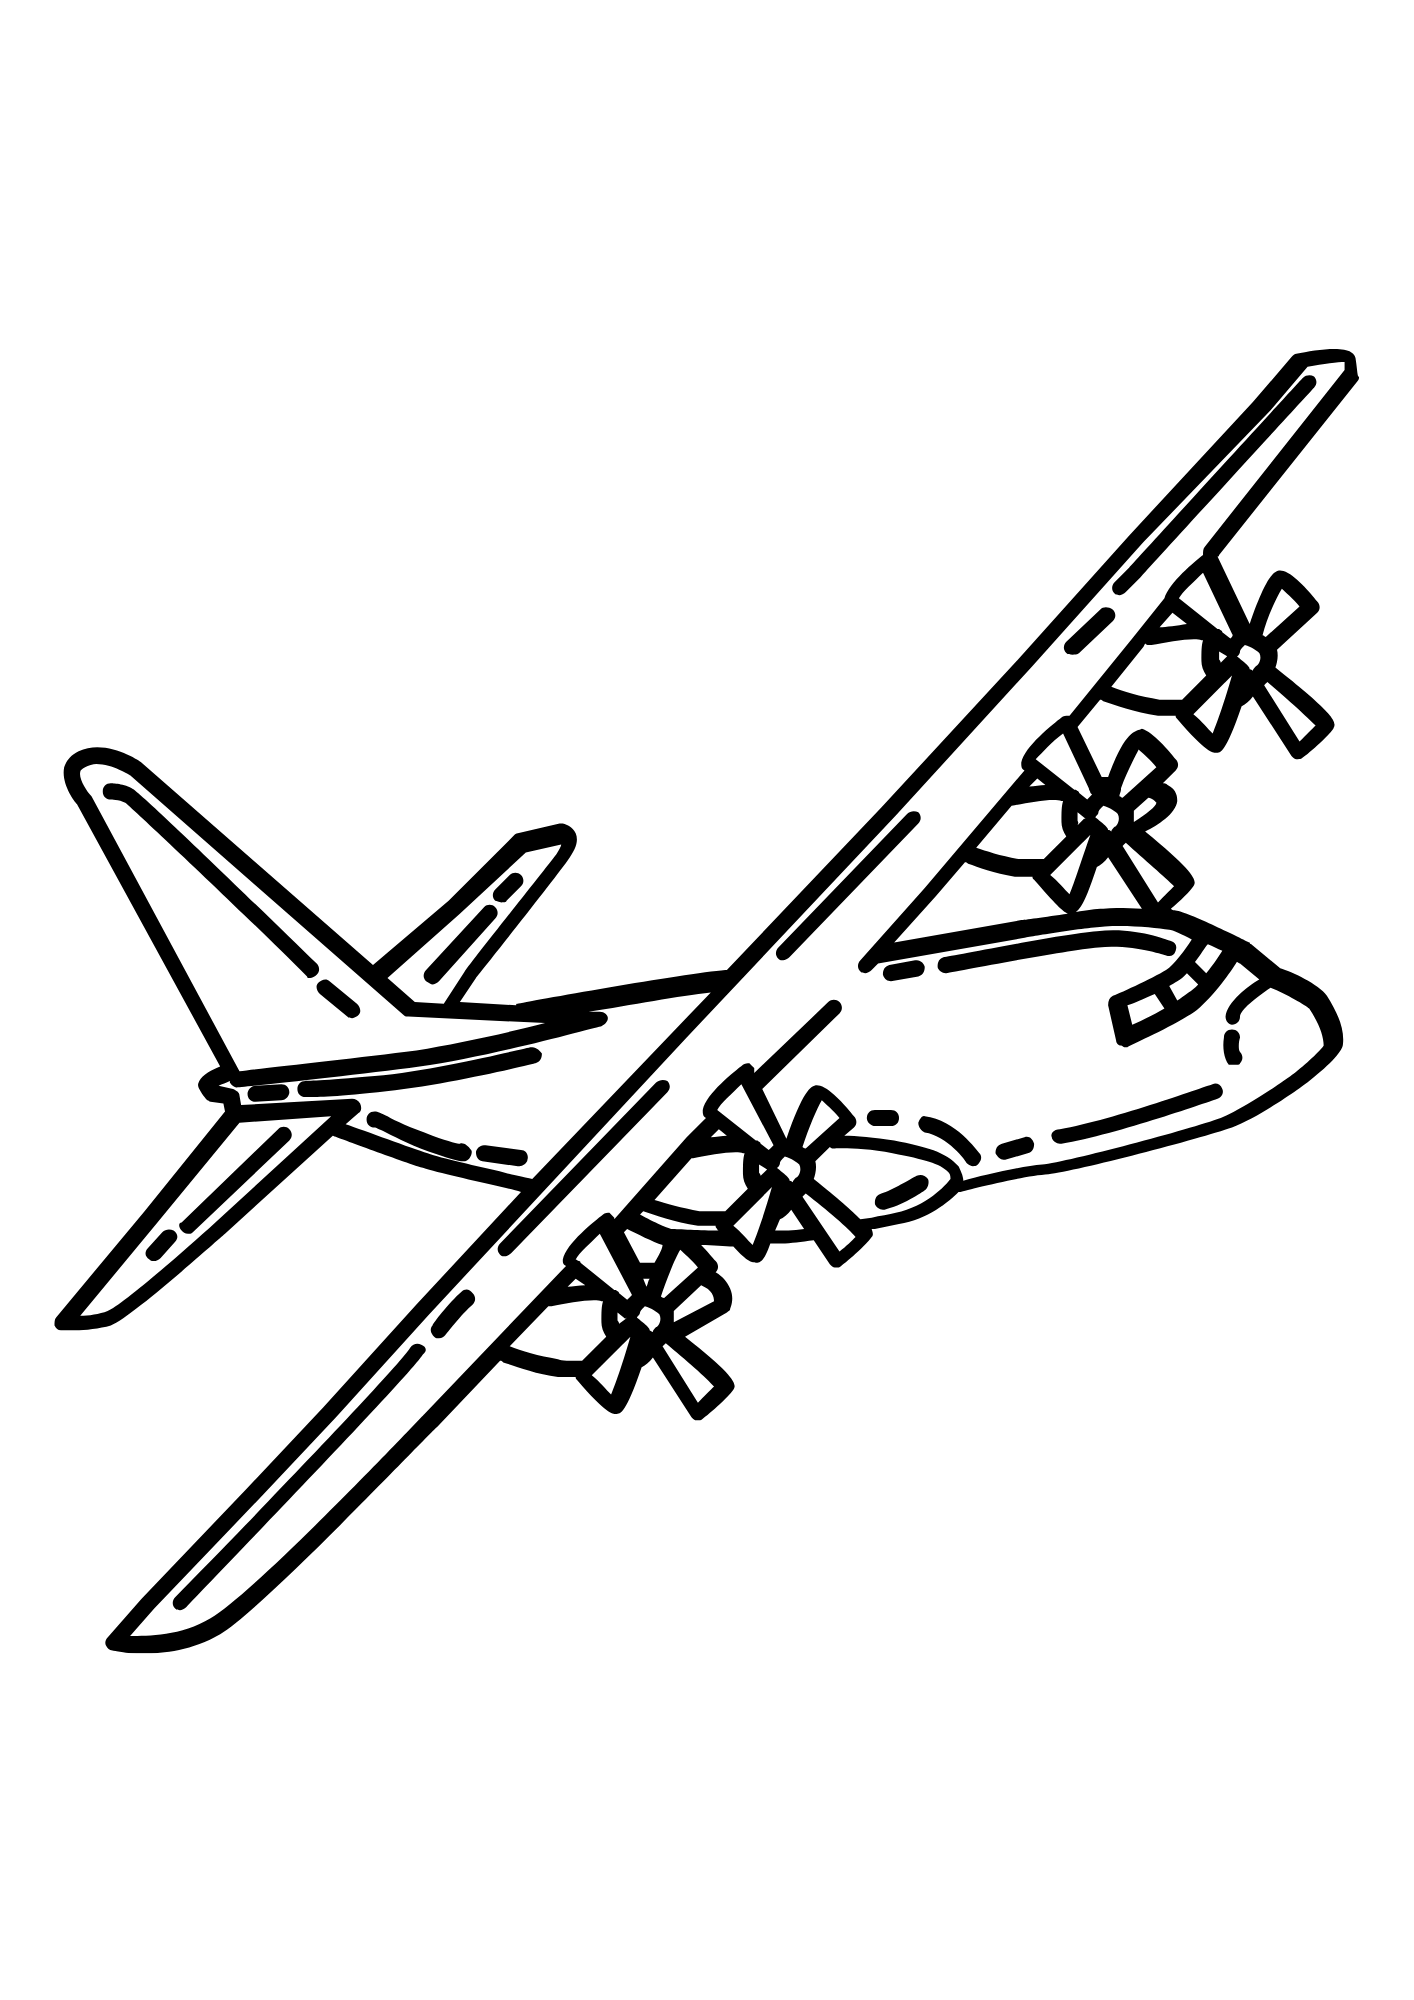 Airplane For Children Image Coloring Pages